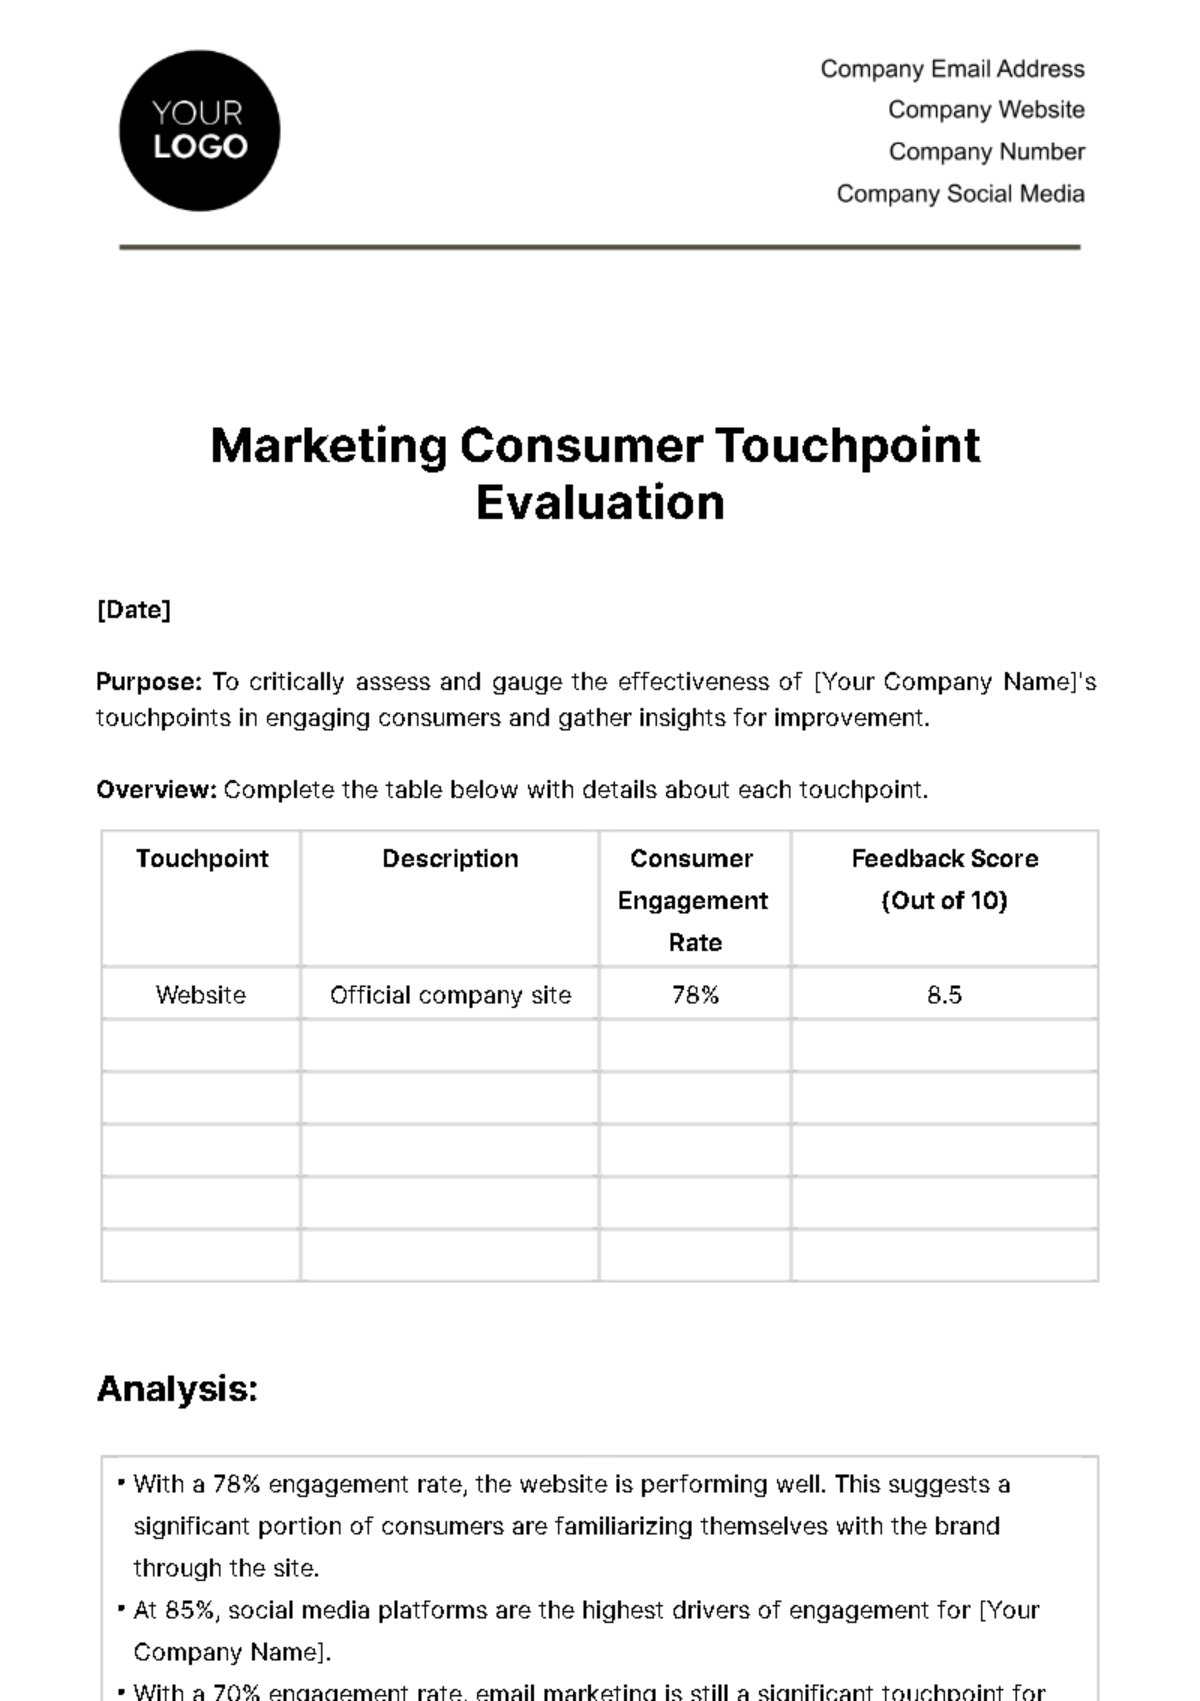 Marketing Consumer Touchpoint Evaluation Template